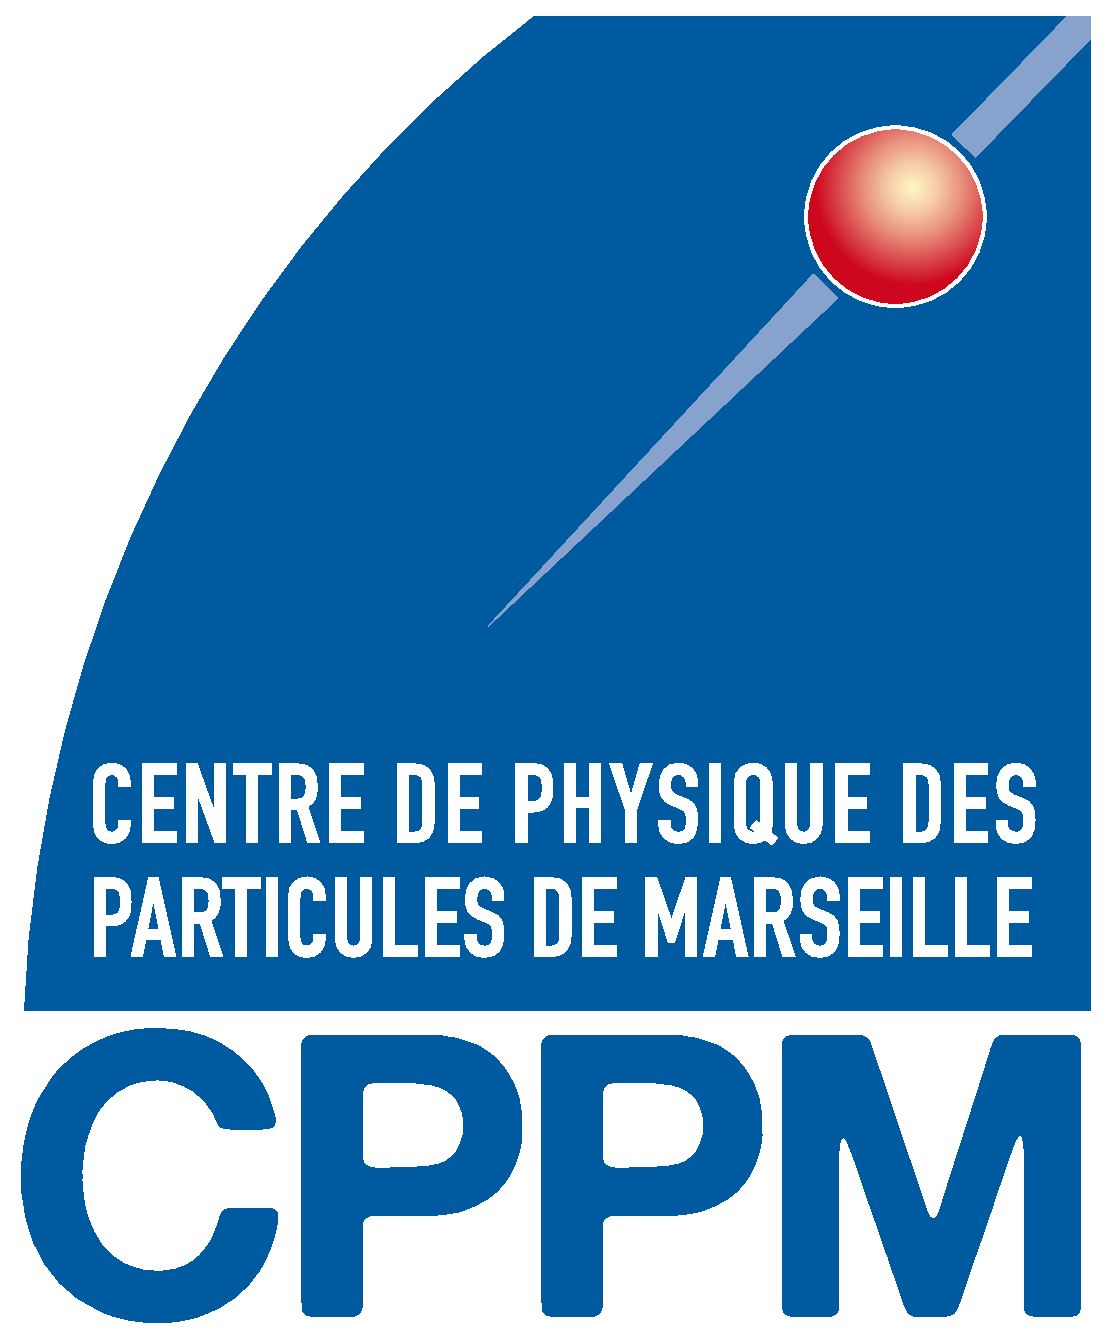 CPPM